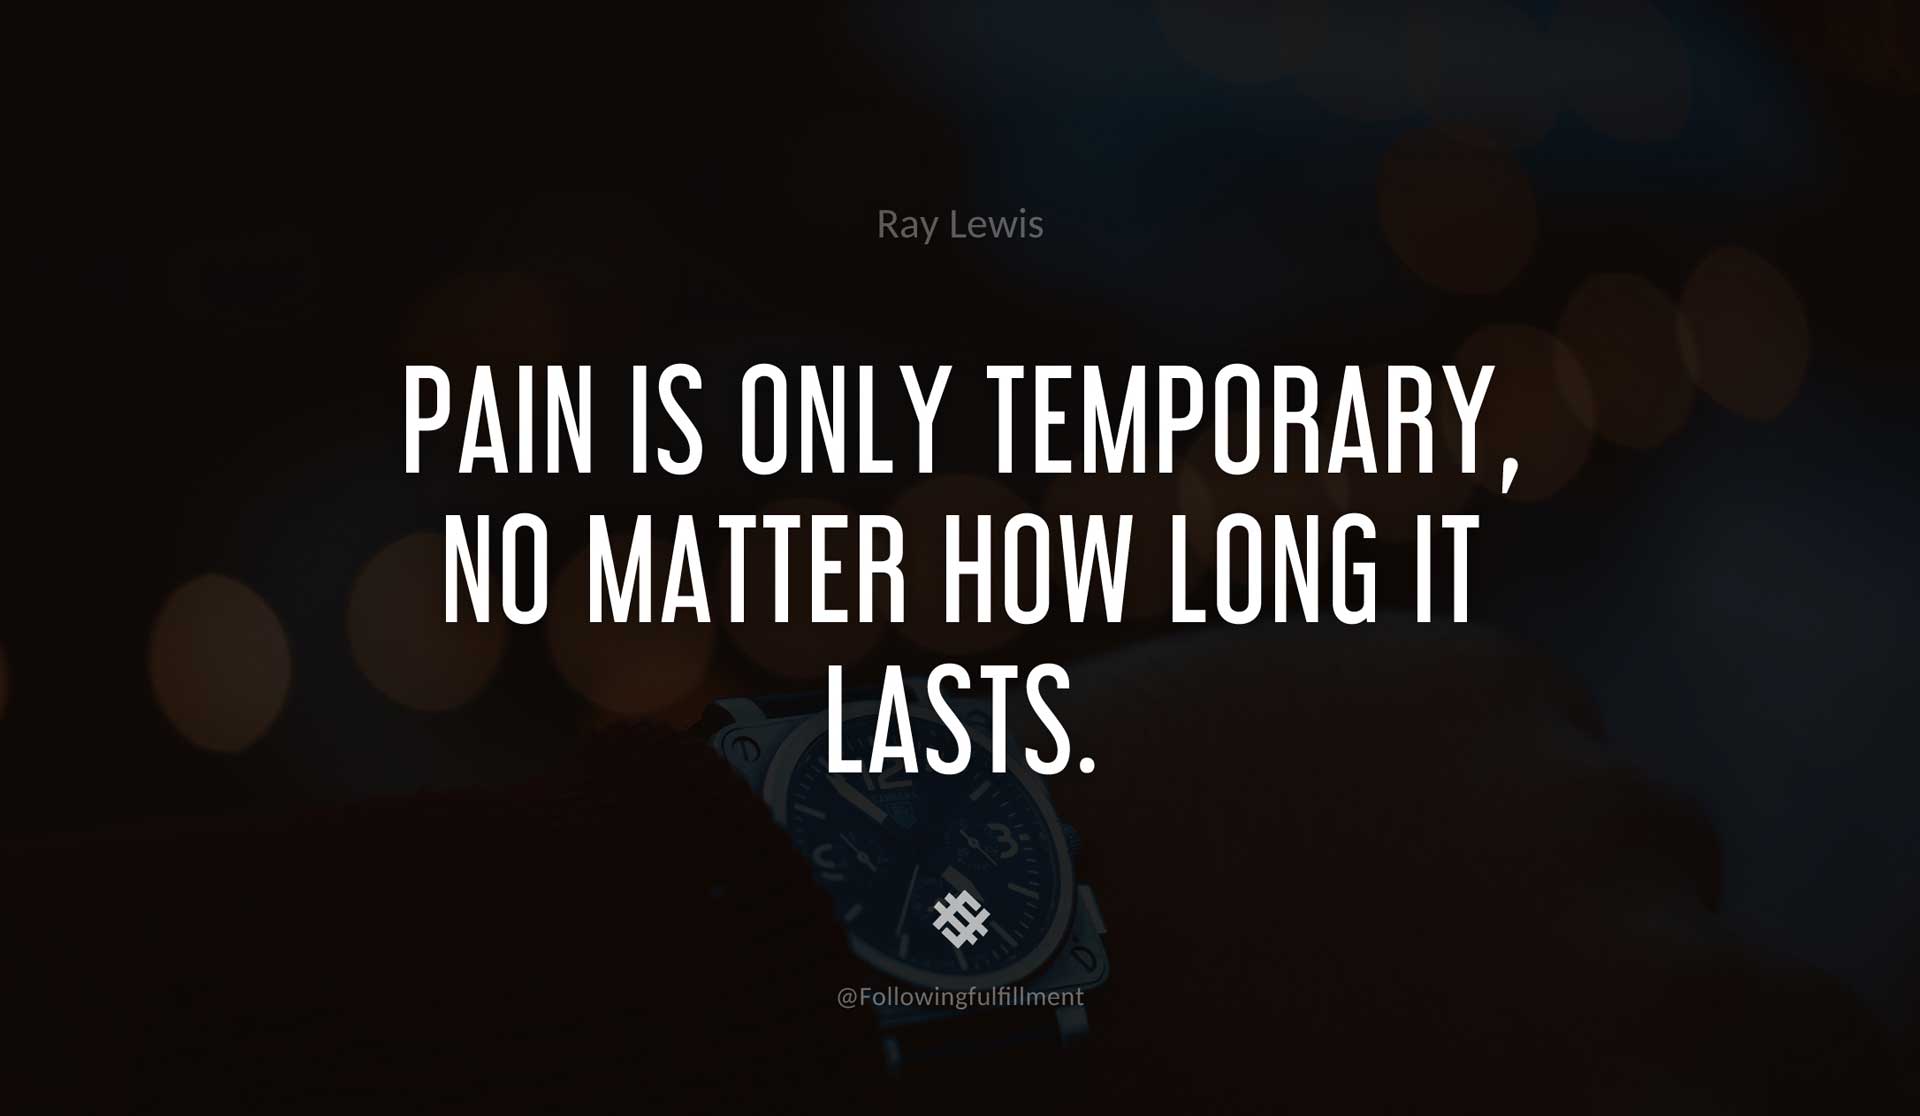 Pain-is-only-temporary,-no-matter-how-long-it-lasts.-RAY-LEWIS-Quote.jpg